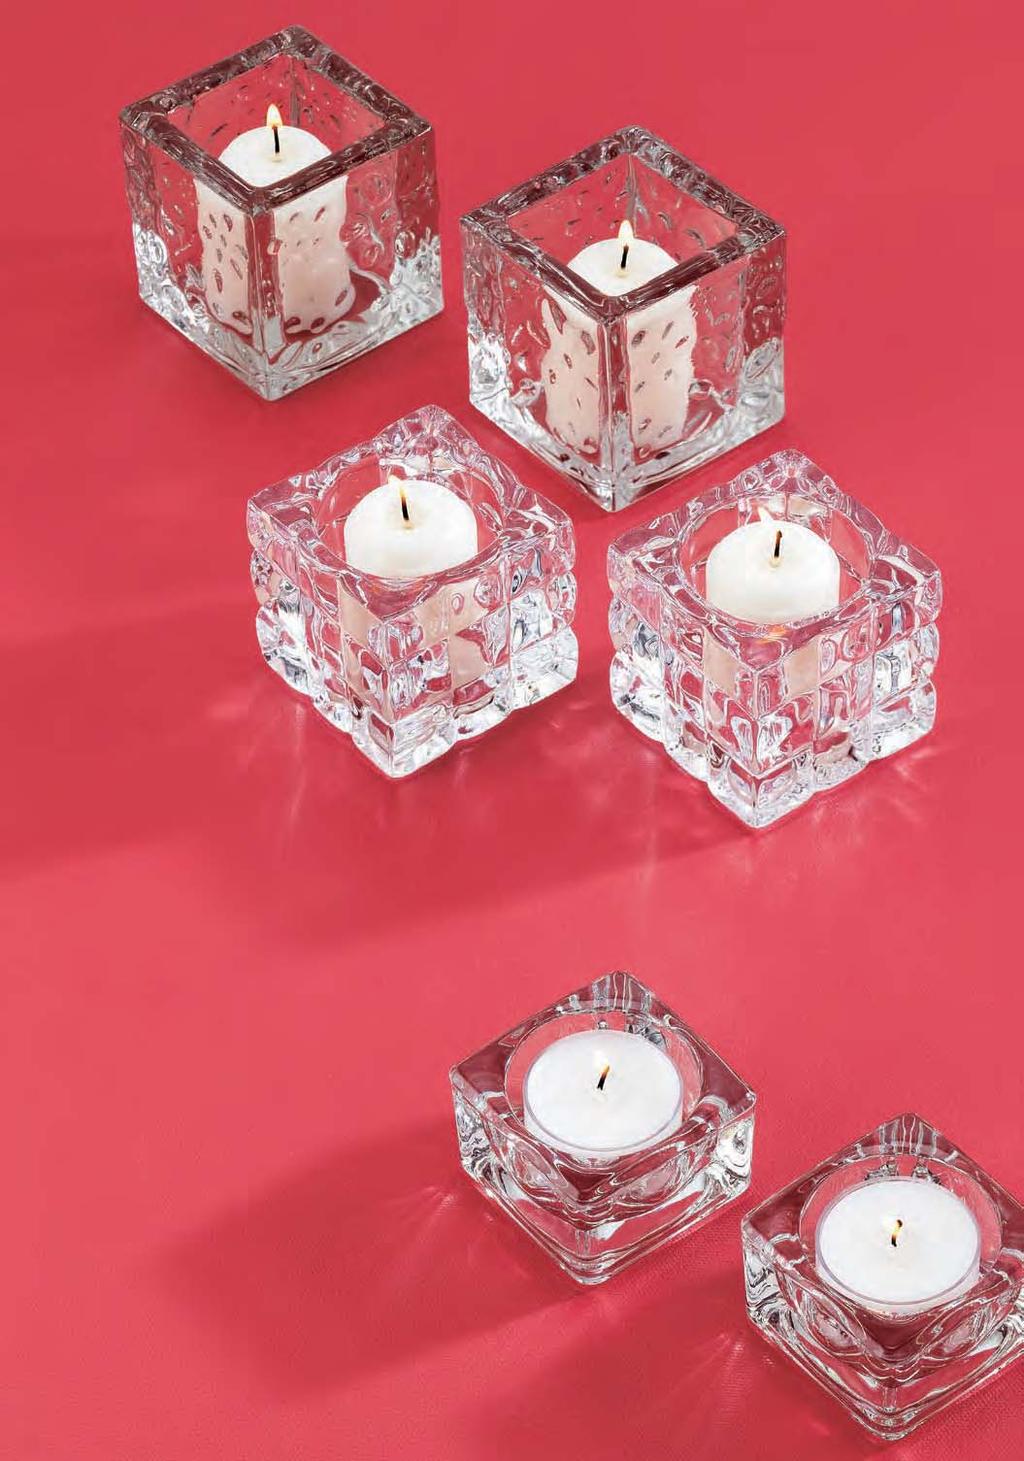 BLOOMING CRYSTAL CUBES (SET OF 2) Glass. 82962 $15.48 2 1/2 L X 2 1/2 W X 2 3/4 H Fits votives and tealights. SQUARED CRYSTAL VOTIVE (SET OF 2) Glass. 82979 $14.